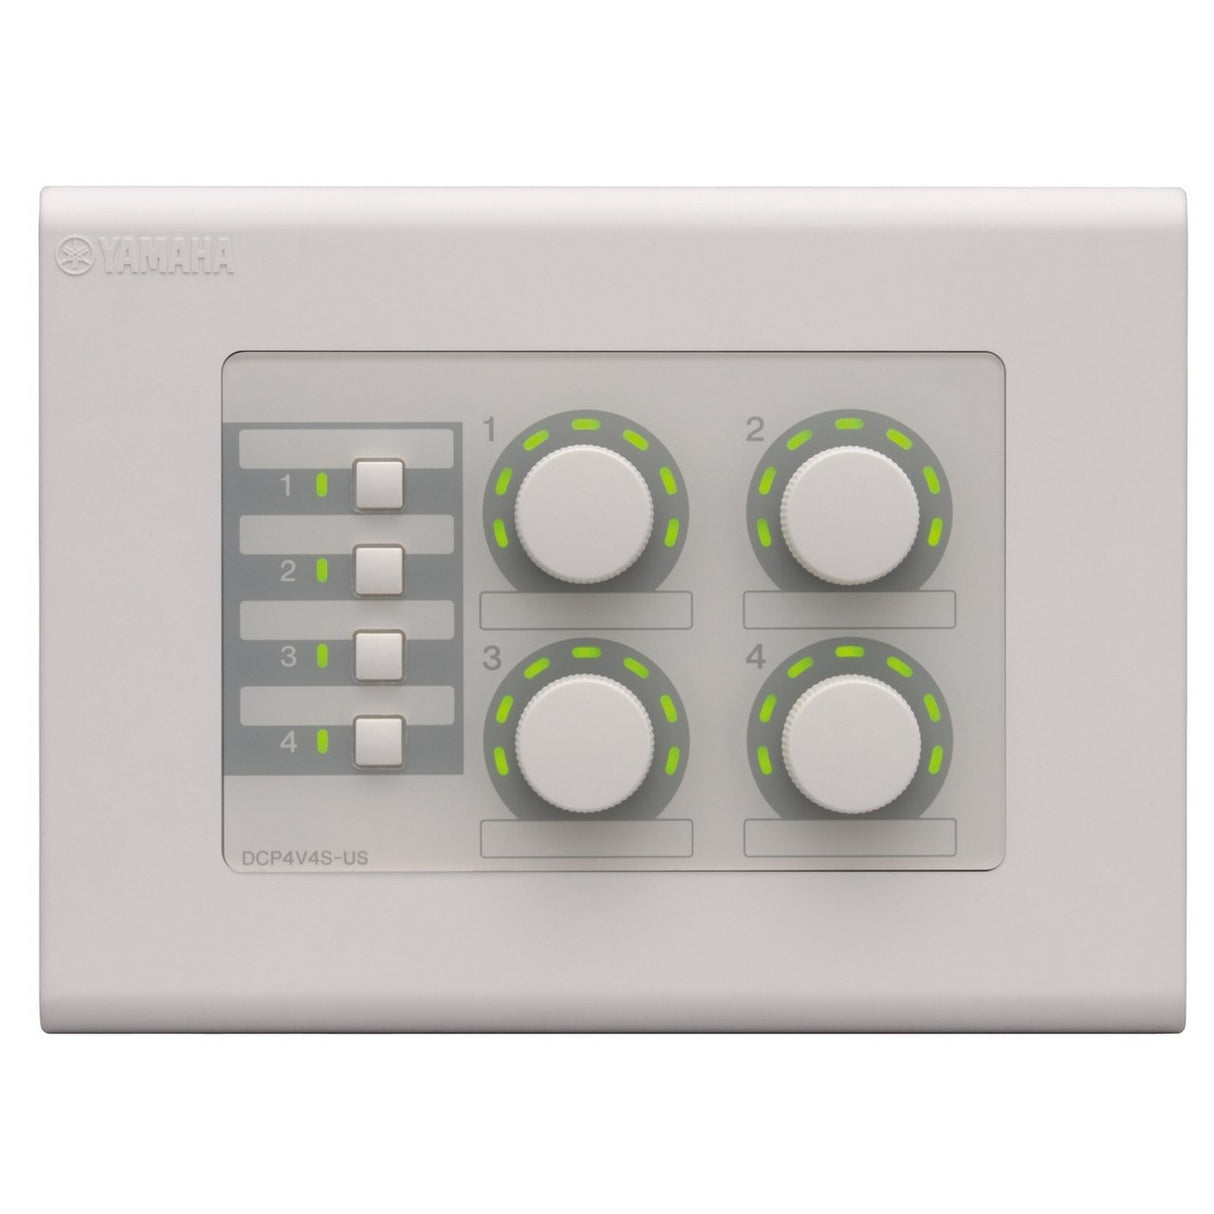 Yamaha DCP4V4S-US | 4 x 4 Volume Switch MTX Series Wall Mount Control Panel